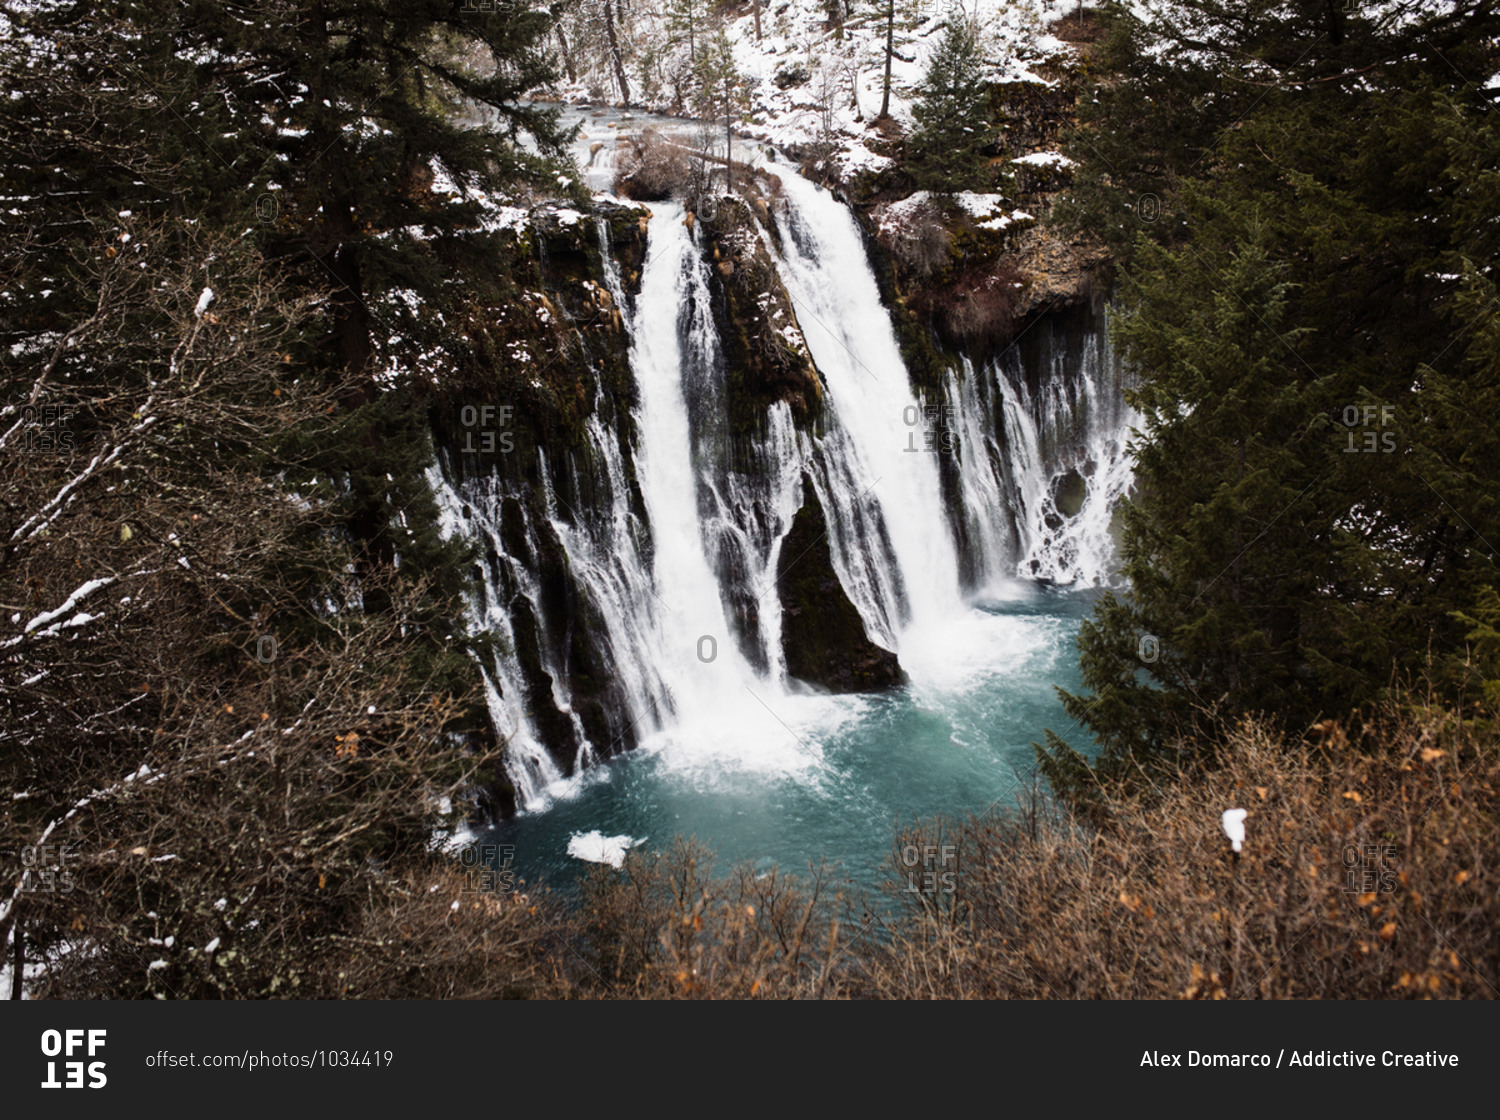 Picturesque scenery of powerful waterfall with pool flowing among snowy forest in mountainous terrain in winter day in USA